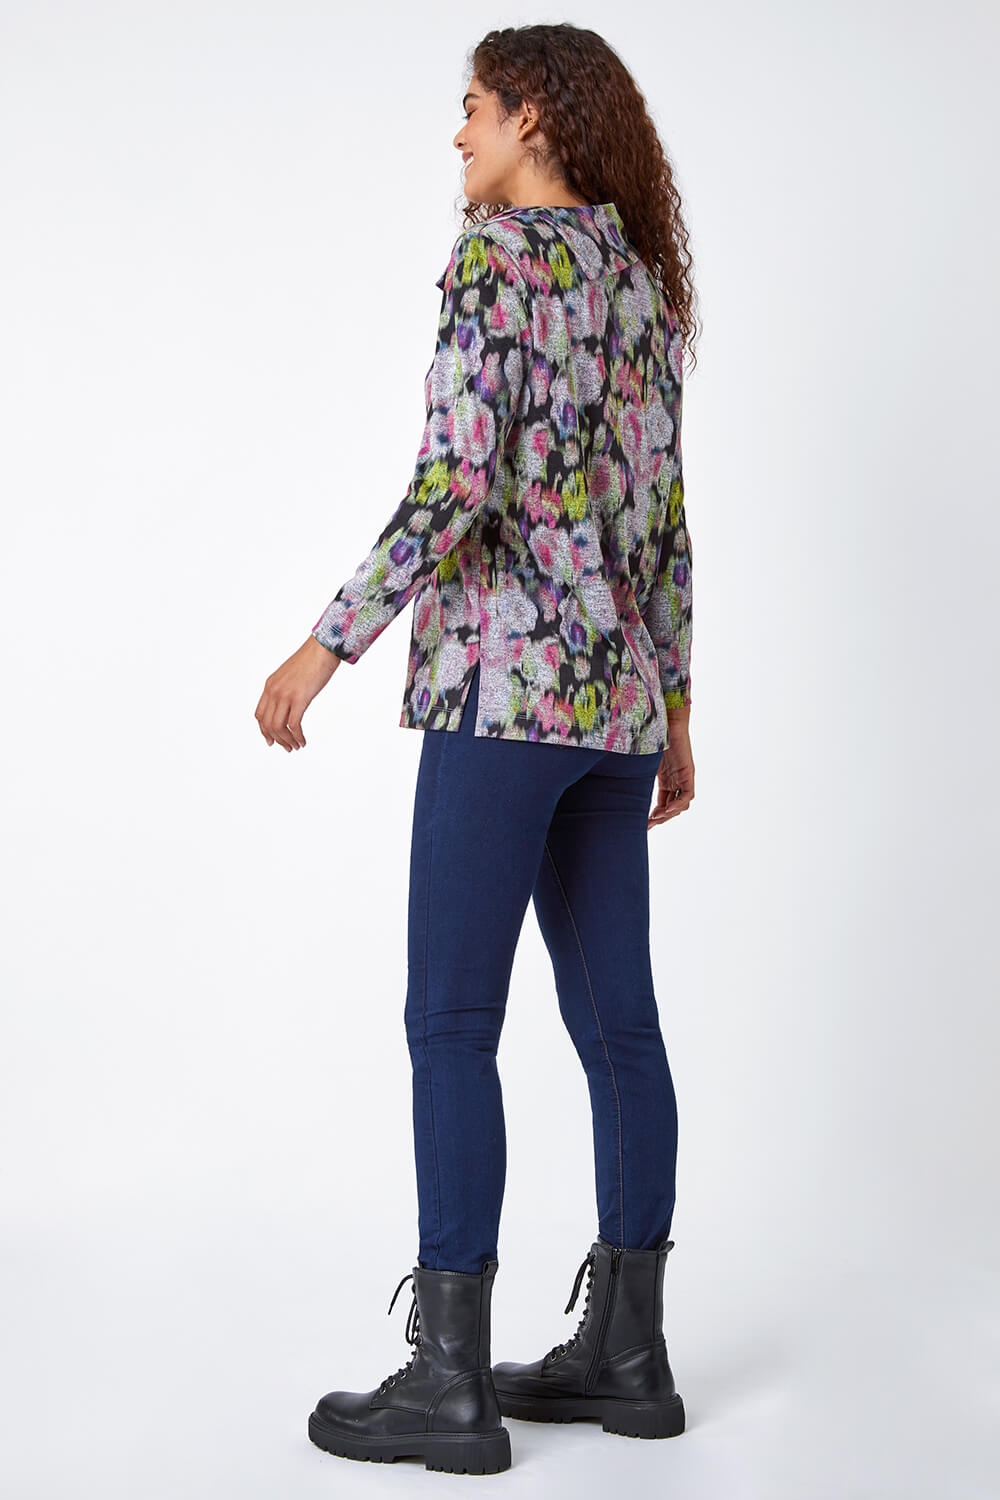 Grey Floral Print Fold Neck Stretch Top, Image 5 of 5